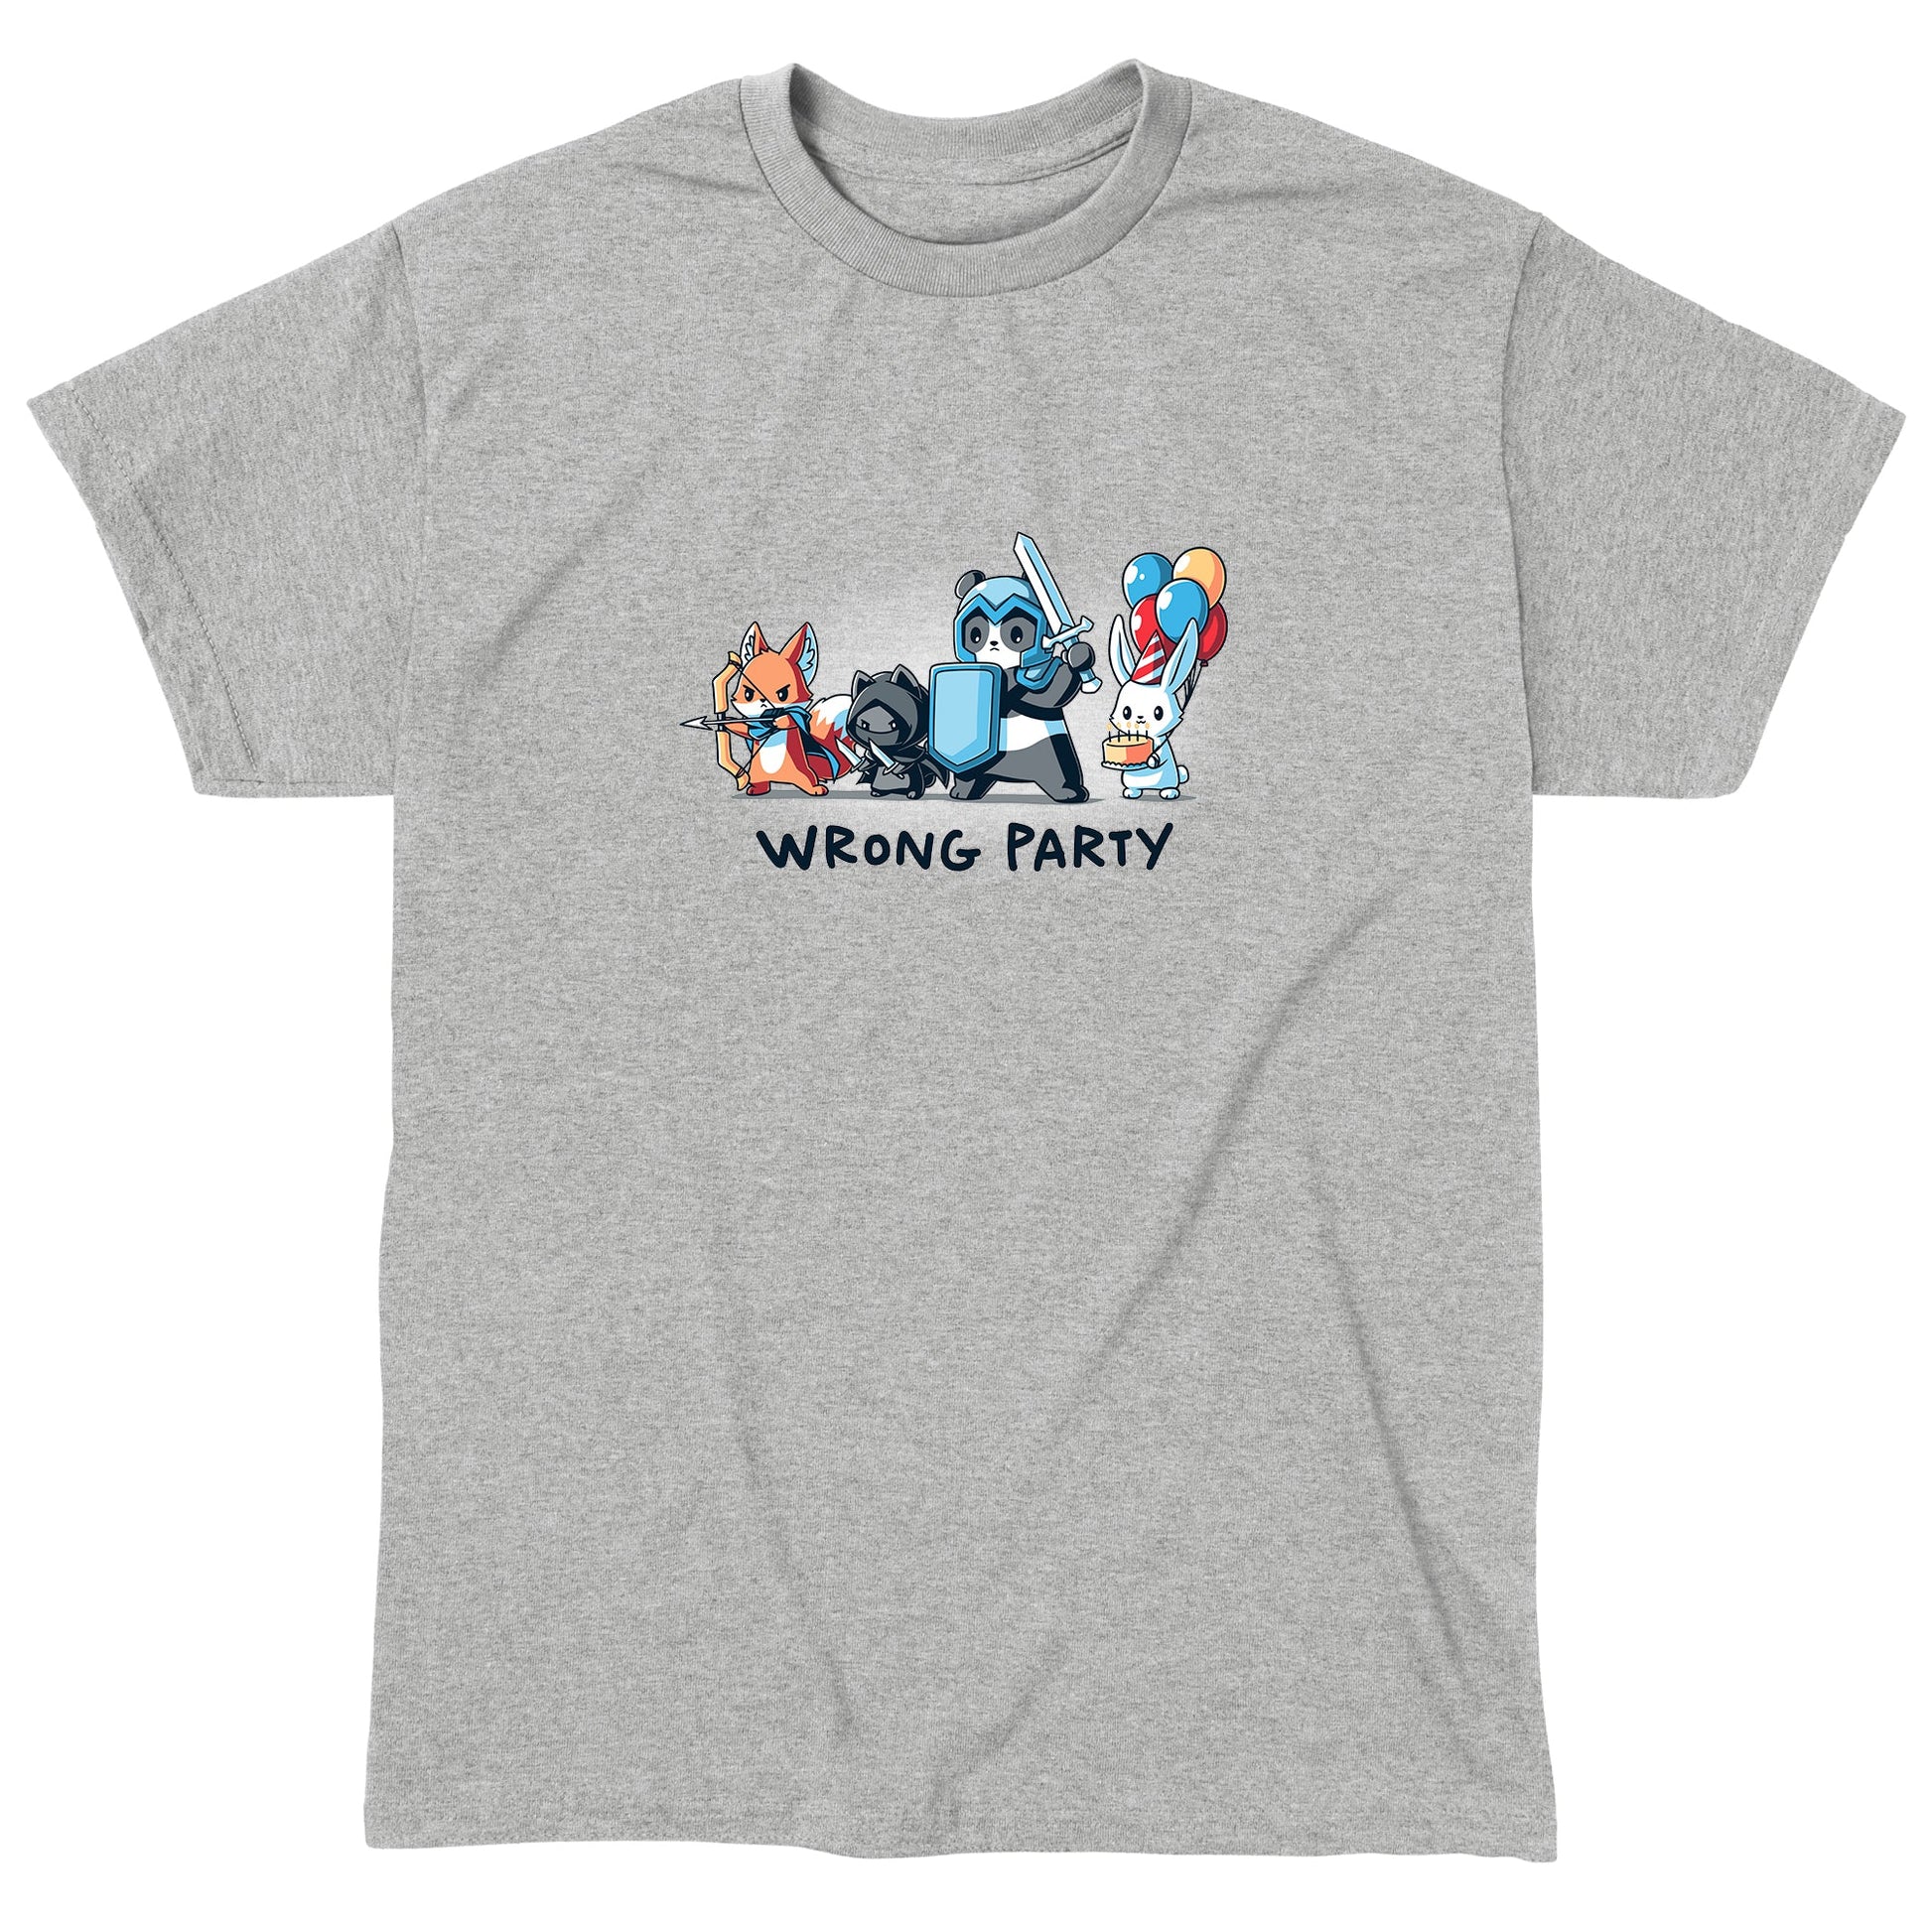 Classic Cotton T-shirt_A group of cartoon animals dressed as an archer fox, ninja cat, knight panda, and a rabbit holding balloons and cake. Text below reads "WRONG PARTY." This whimsical scene is printed on a monsterdigital Wrong Party apparel made from super soft ringspun cotton. Unisex apparelavailable.